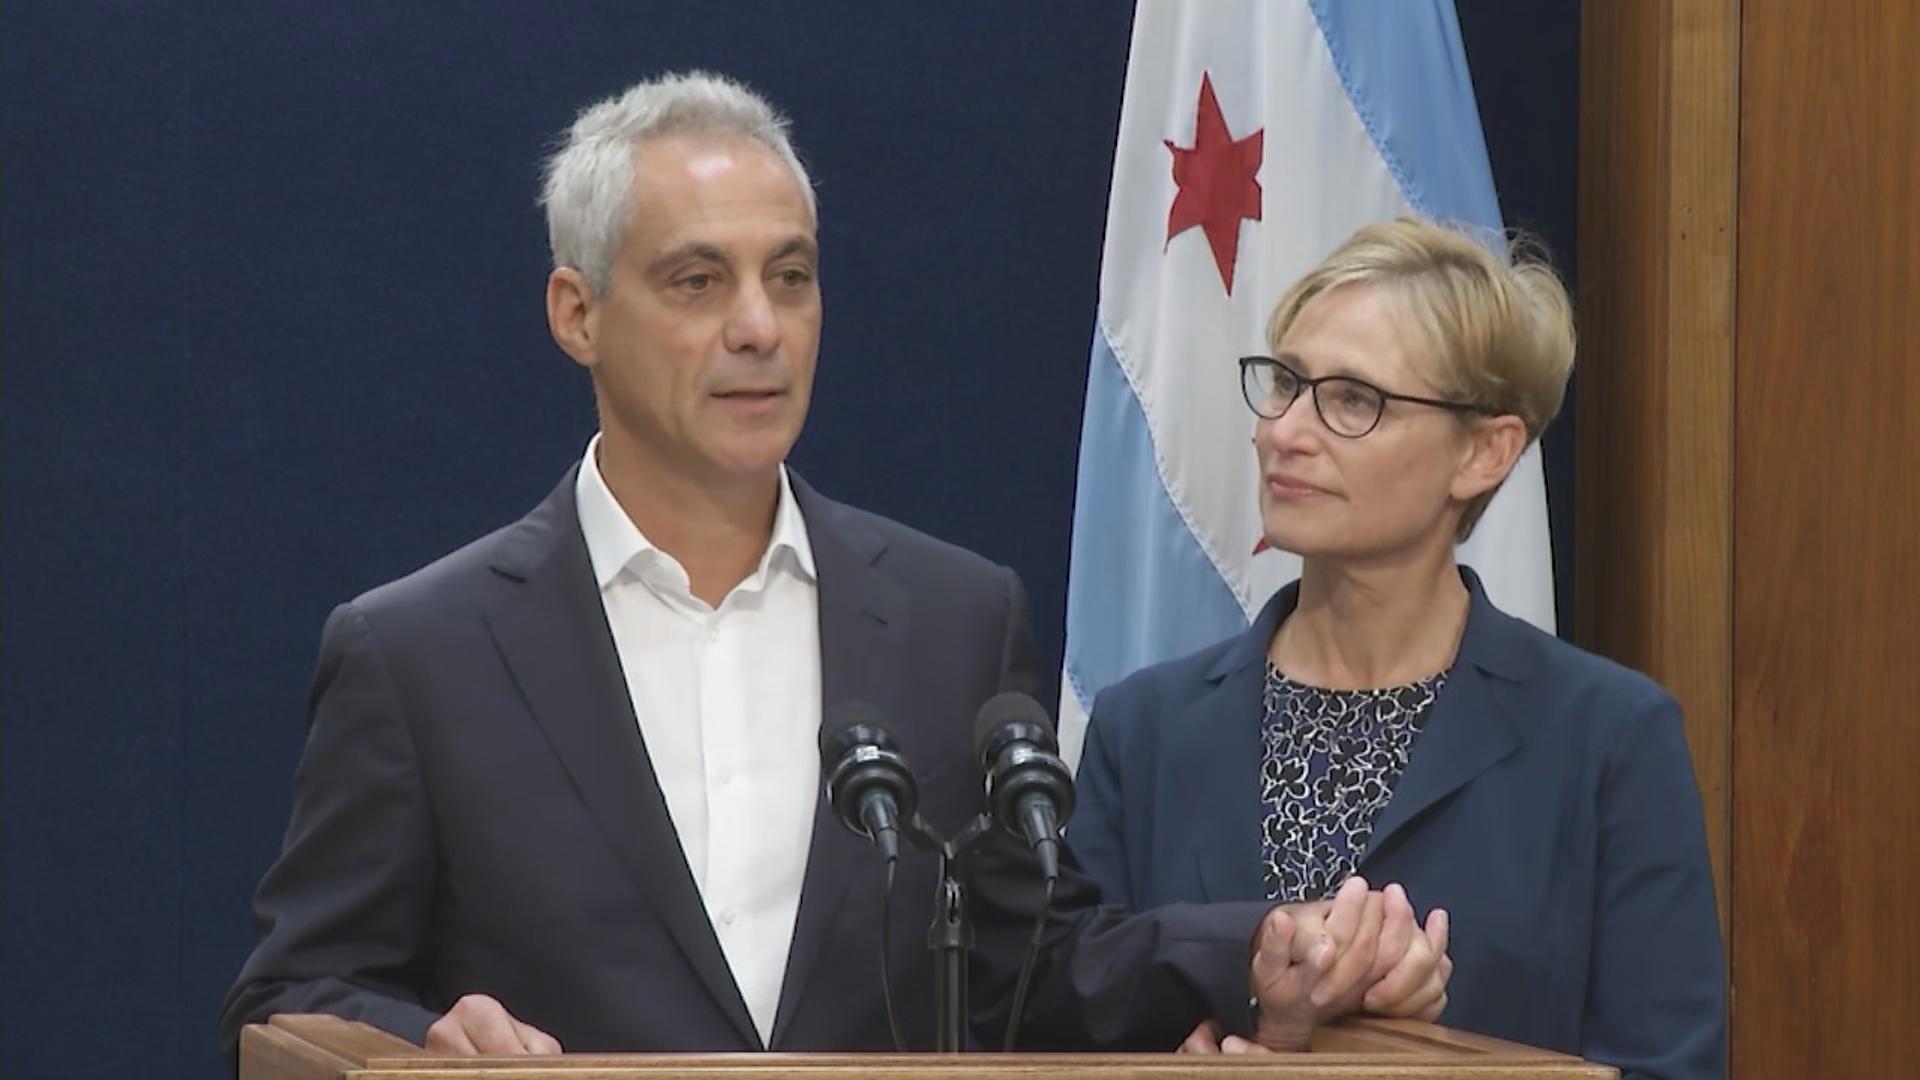 “Now with our three children in college, Amy and I have decided it is time to write another chapter together,” Mayor Rahm Emanuel said Tuesday, Sept. 4, 2018 with his wife Amy Rule by his side as he announced he would not seek re-election. 